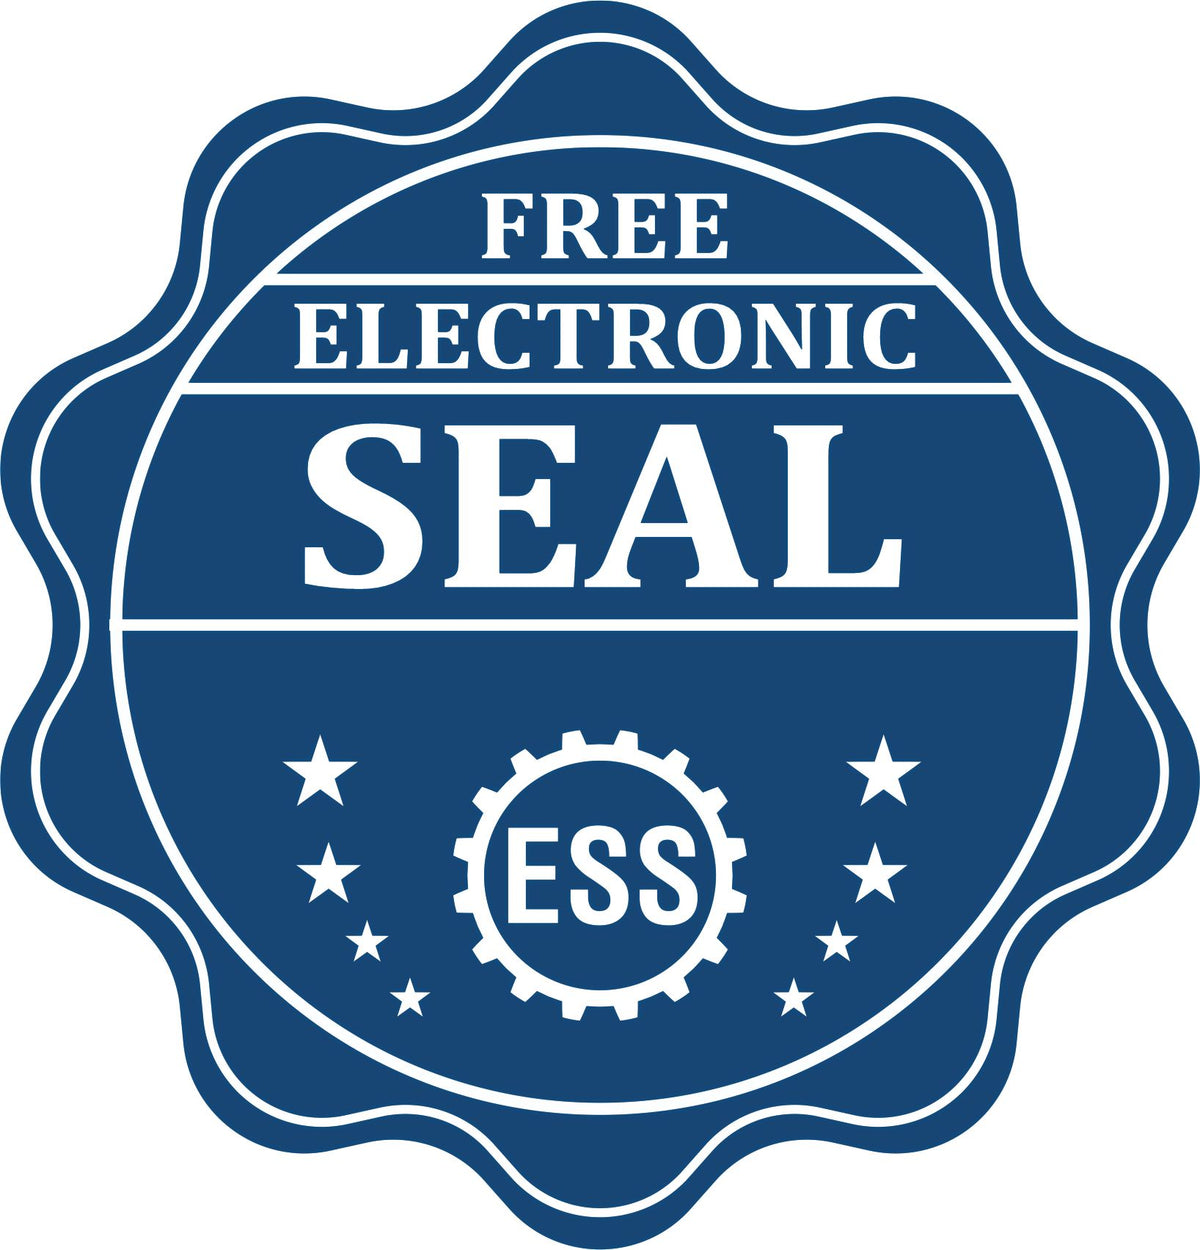 A badge showing a free electronic seal for the Arizona Desk Architect Embossing Seal with stars and the ESS gear on the emblem.